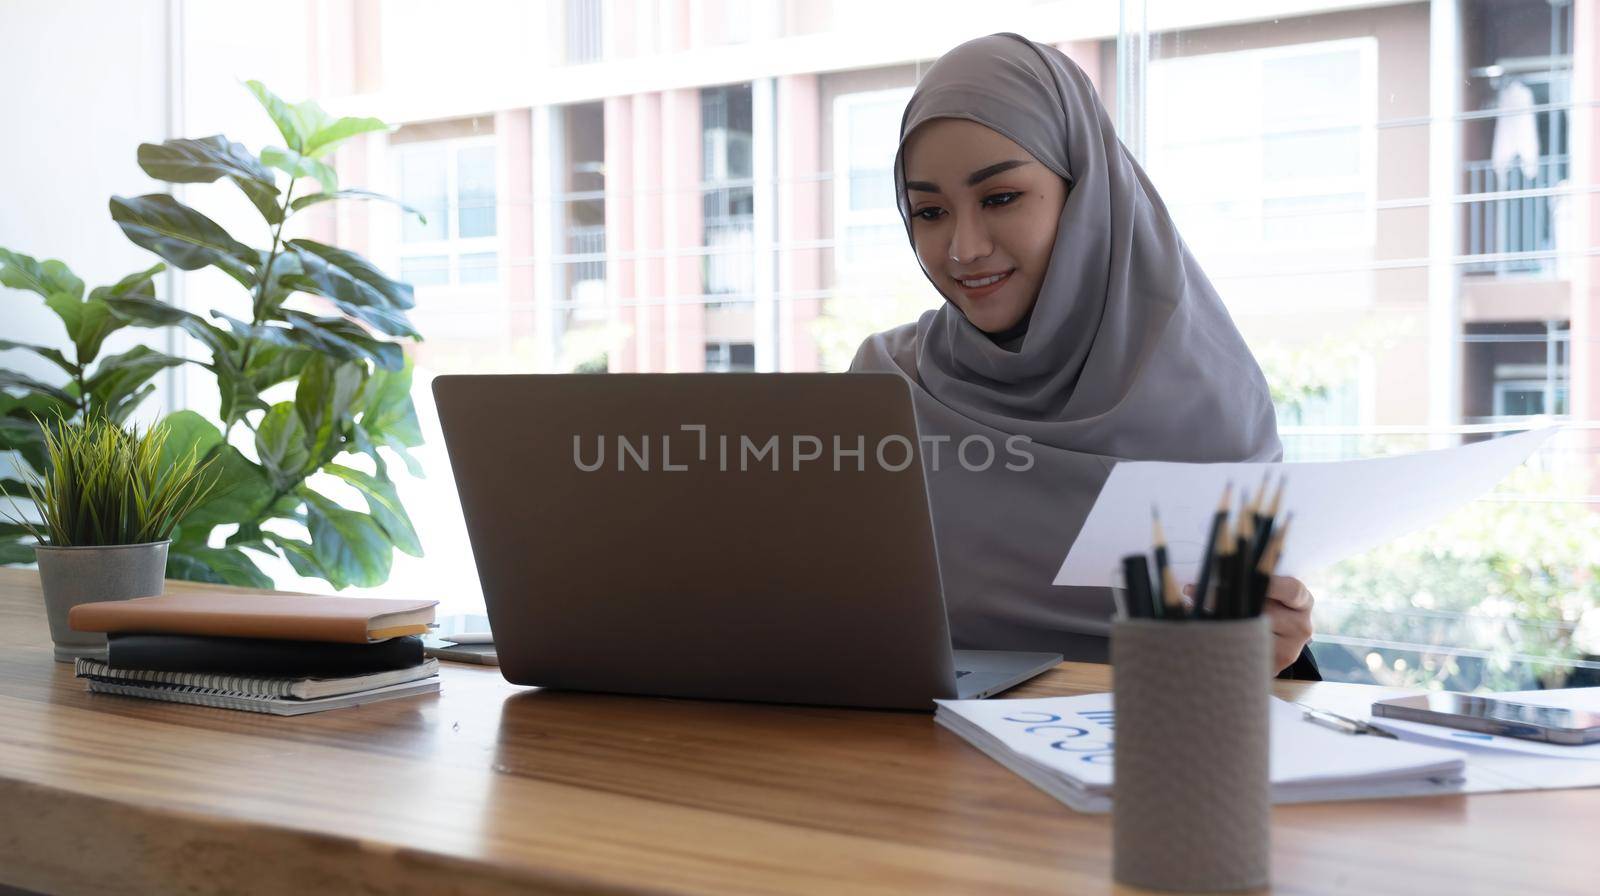 Portrait of Muslim Businesswoman Wearing Hijab Works on Project, Does Document Analysis. Empowered Digital Entrepreneur Works on e-Commerce Startup Project by wichayada